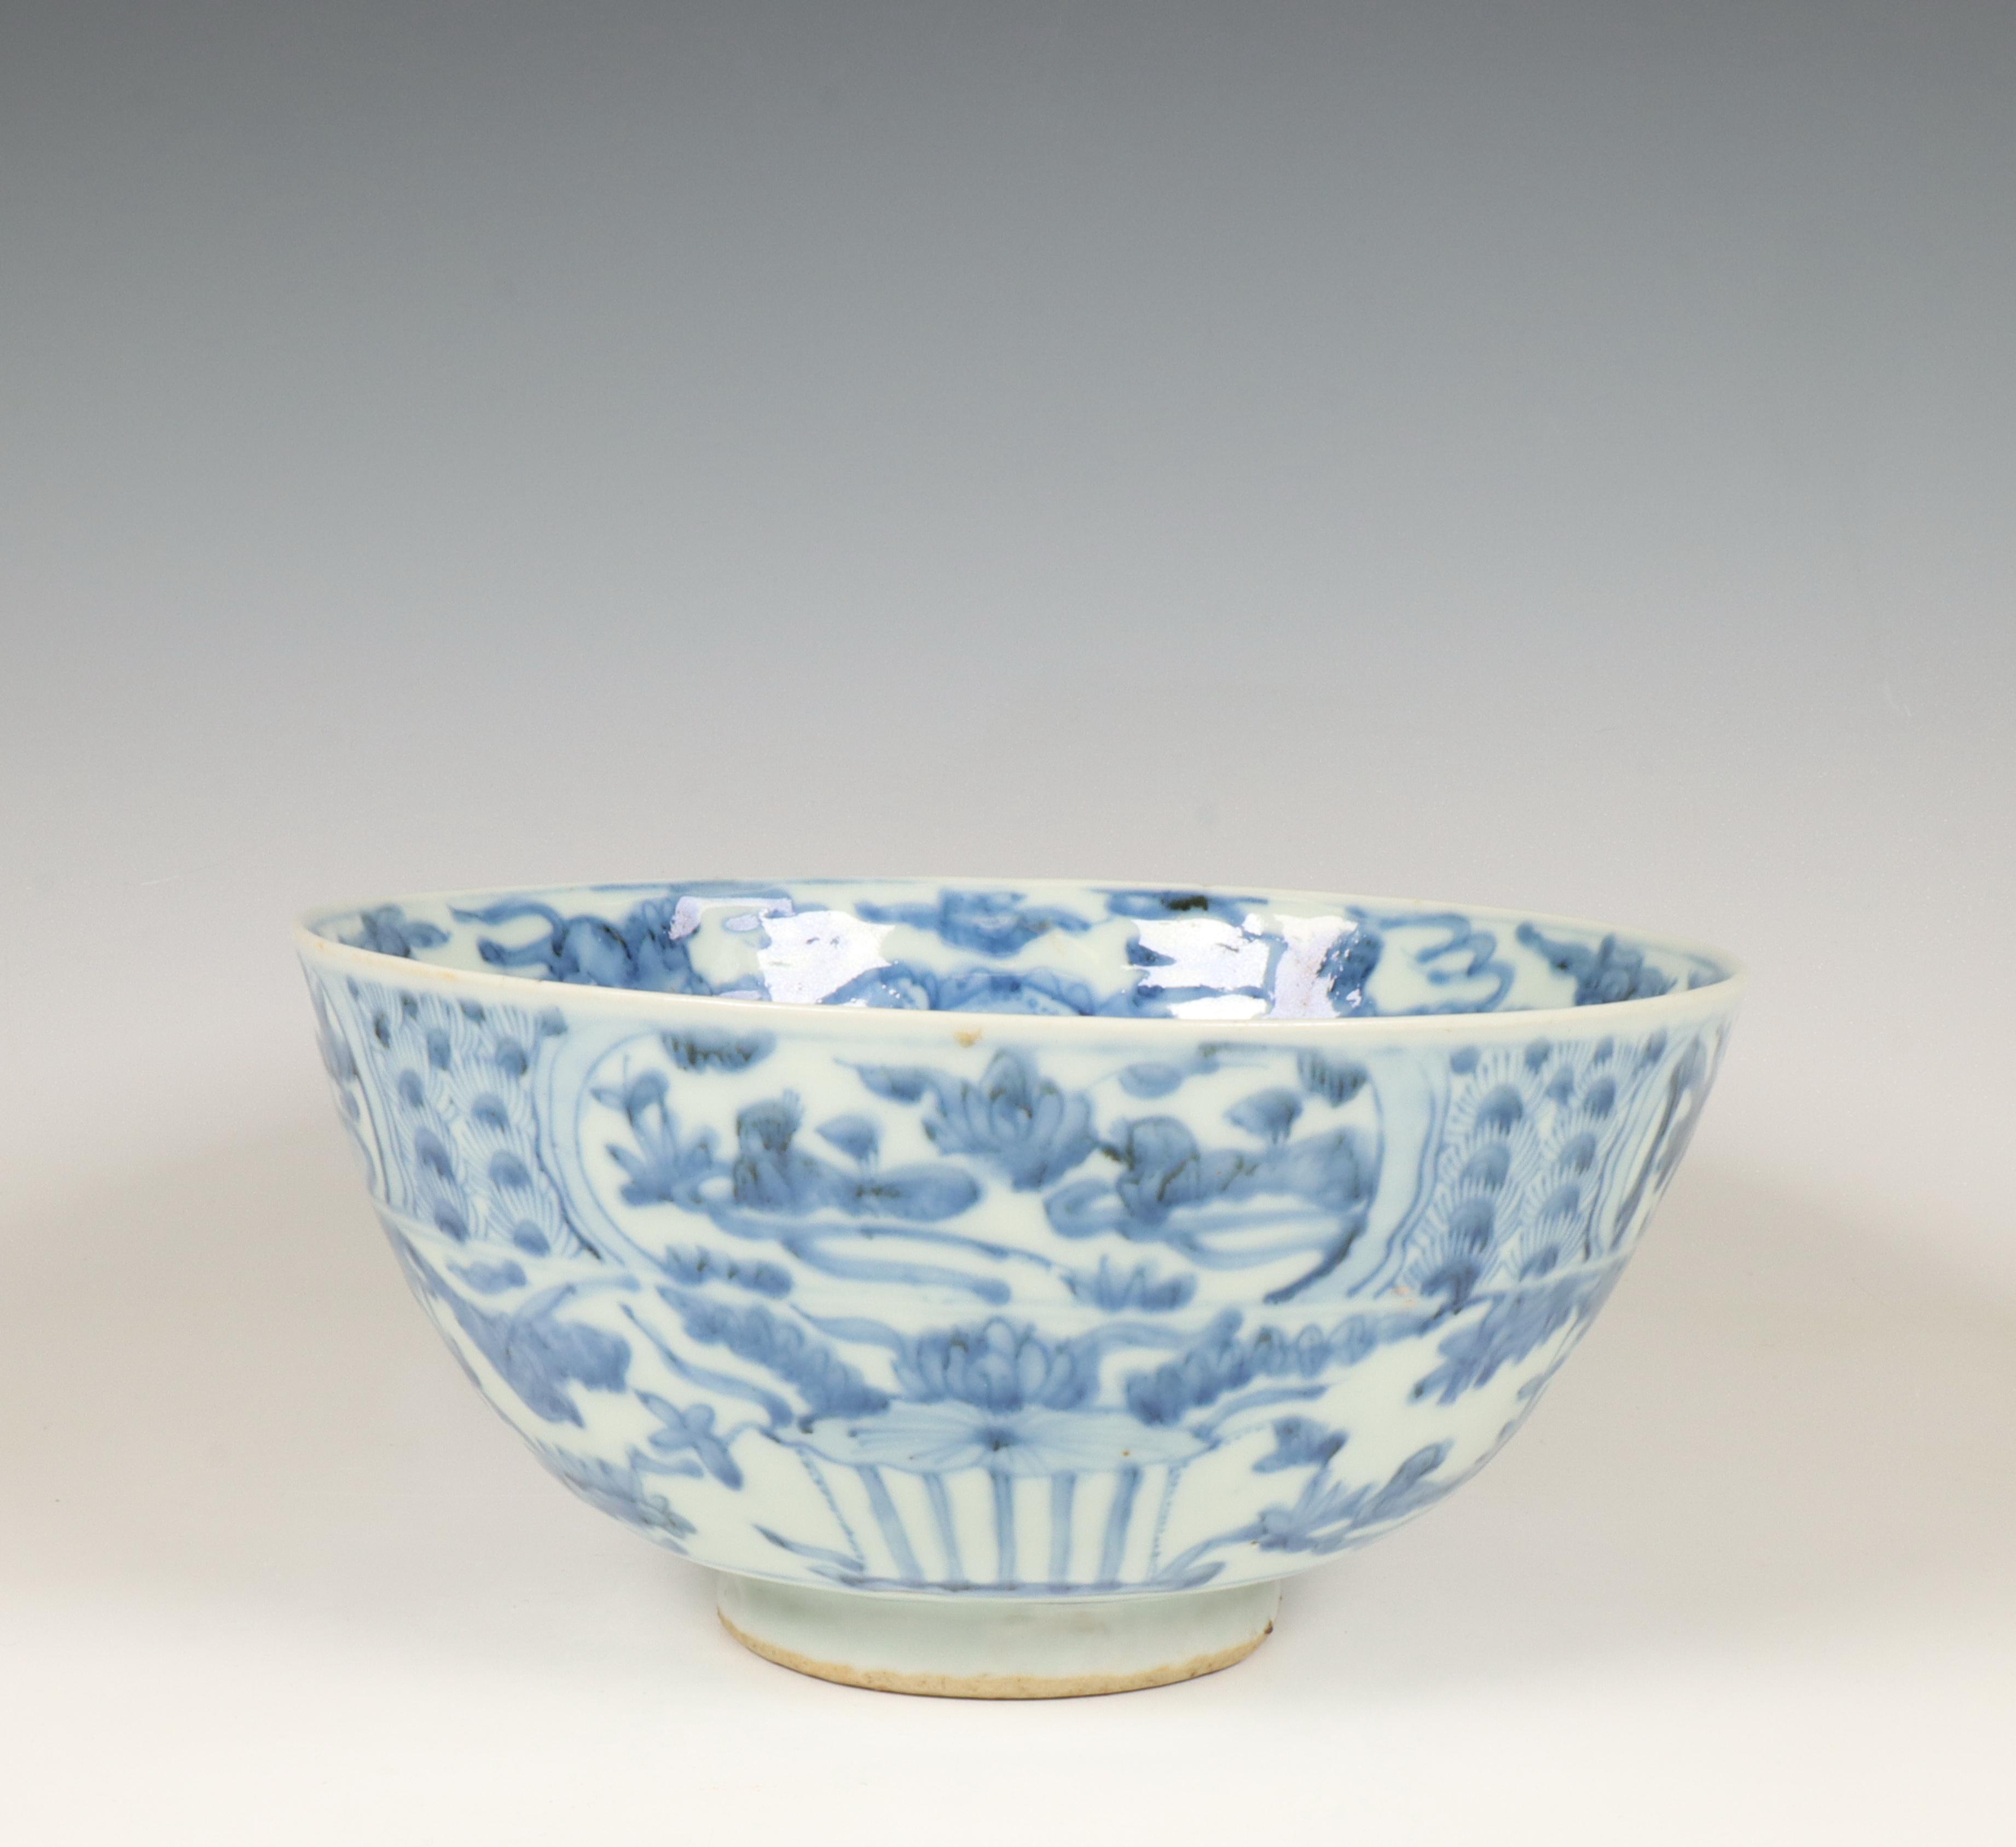 China, a blue and white porcelain bowl, late Ming dynasty (1368-1644), - Image 9 of 11